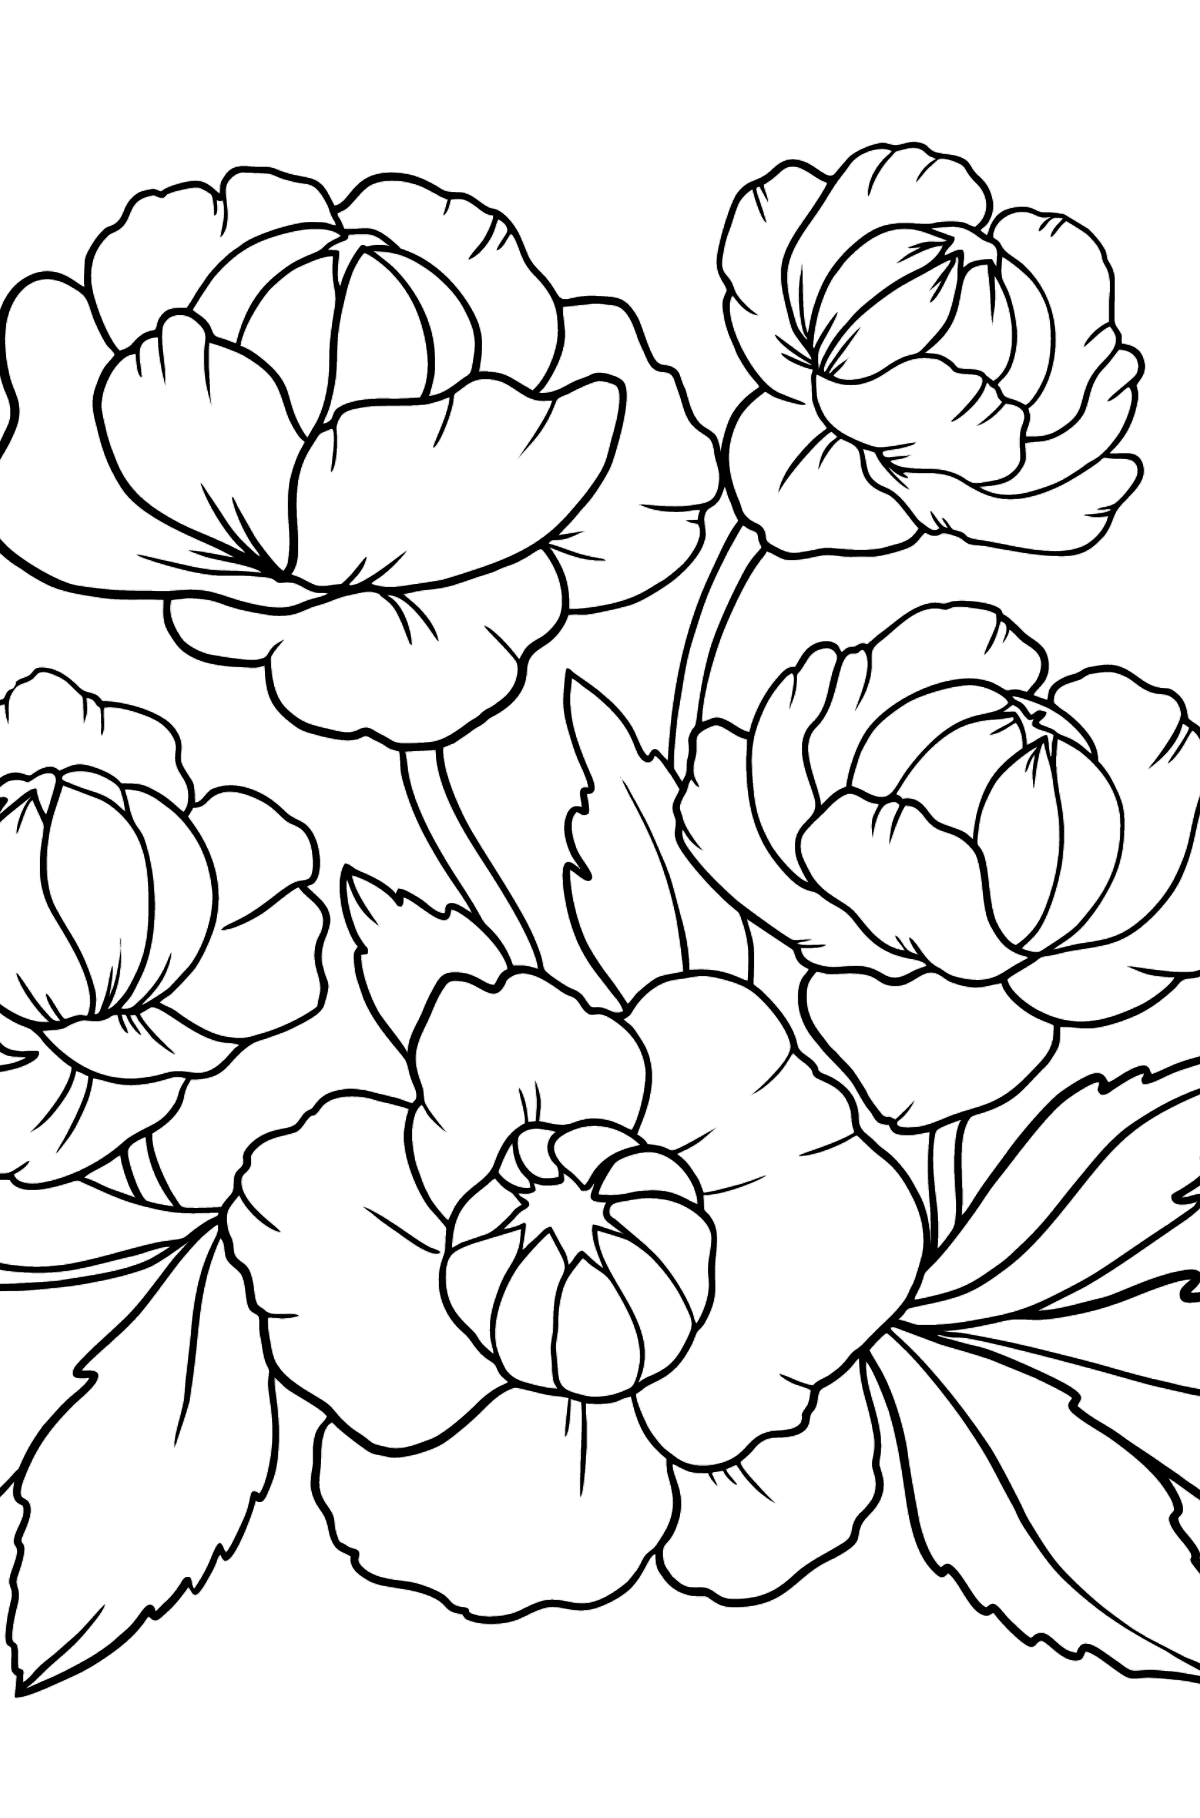 Red and Pink Globeflower Coloring Page - Coloring Pages for Kids